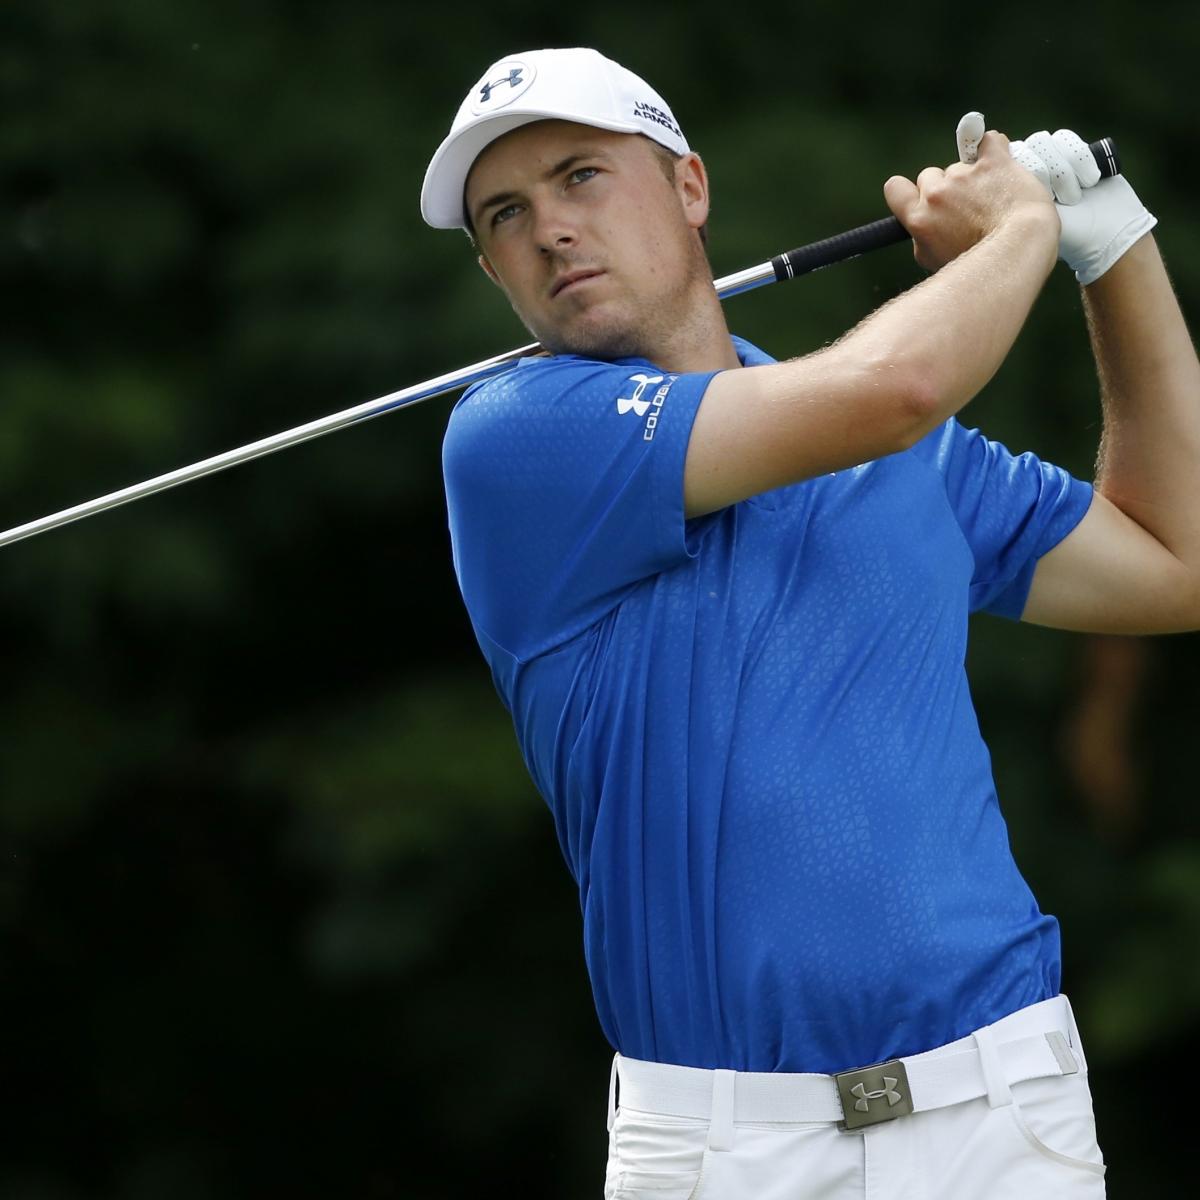 British Open 2014 Notable Sleepers with Favorable Vegas Betting Odds